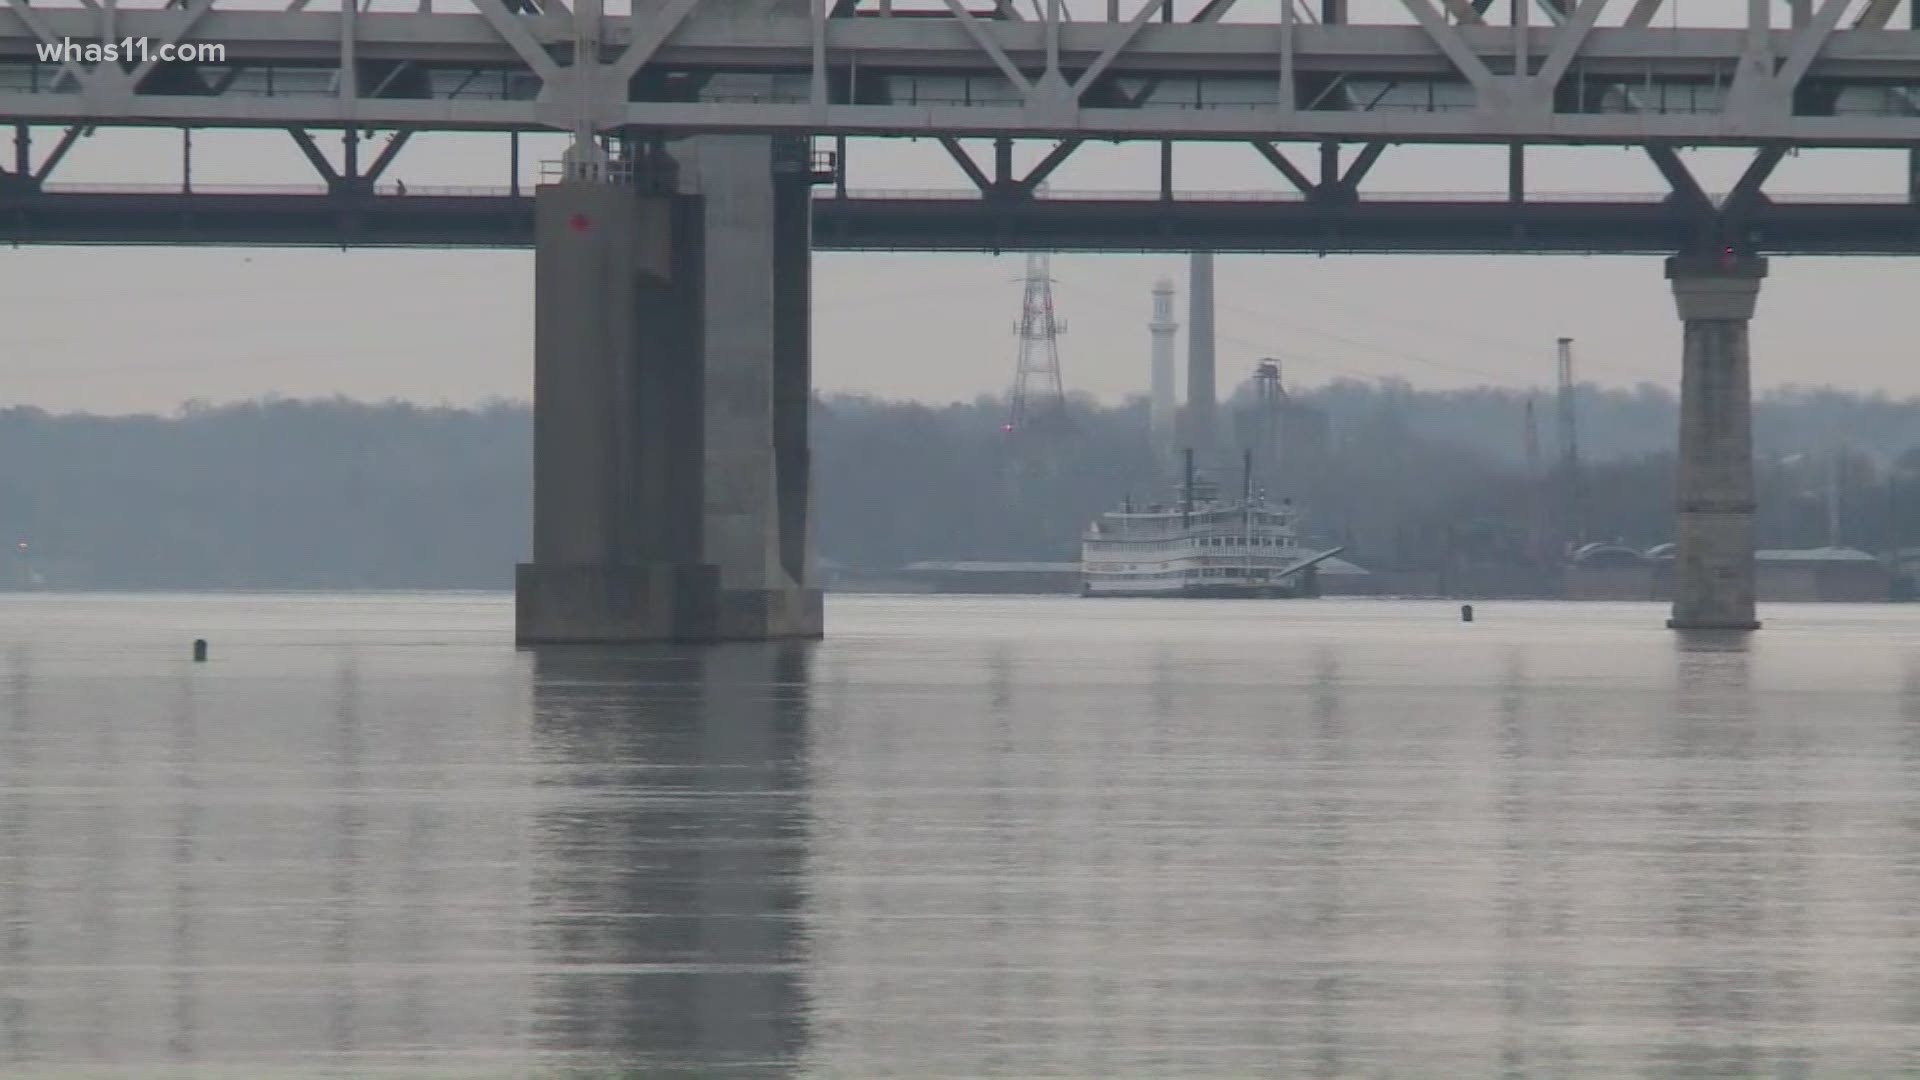 The cruise ship has been in Ohio for inspections, but returned to Louisville Saturday morning.